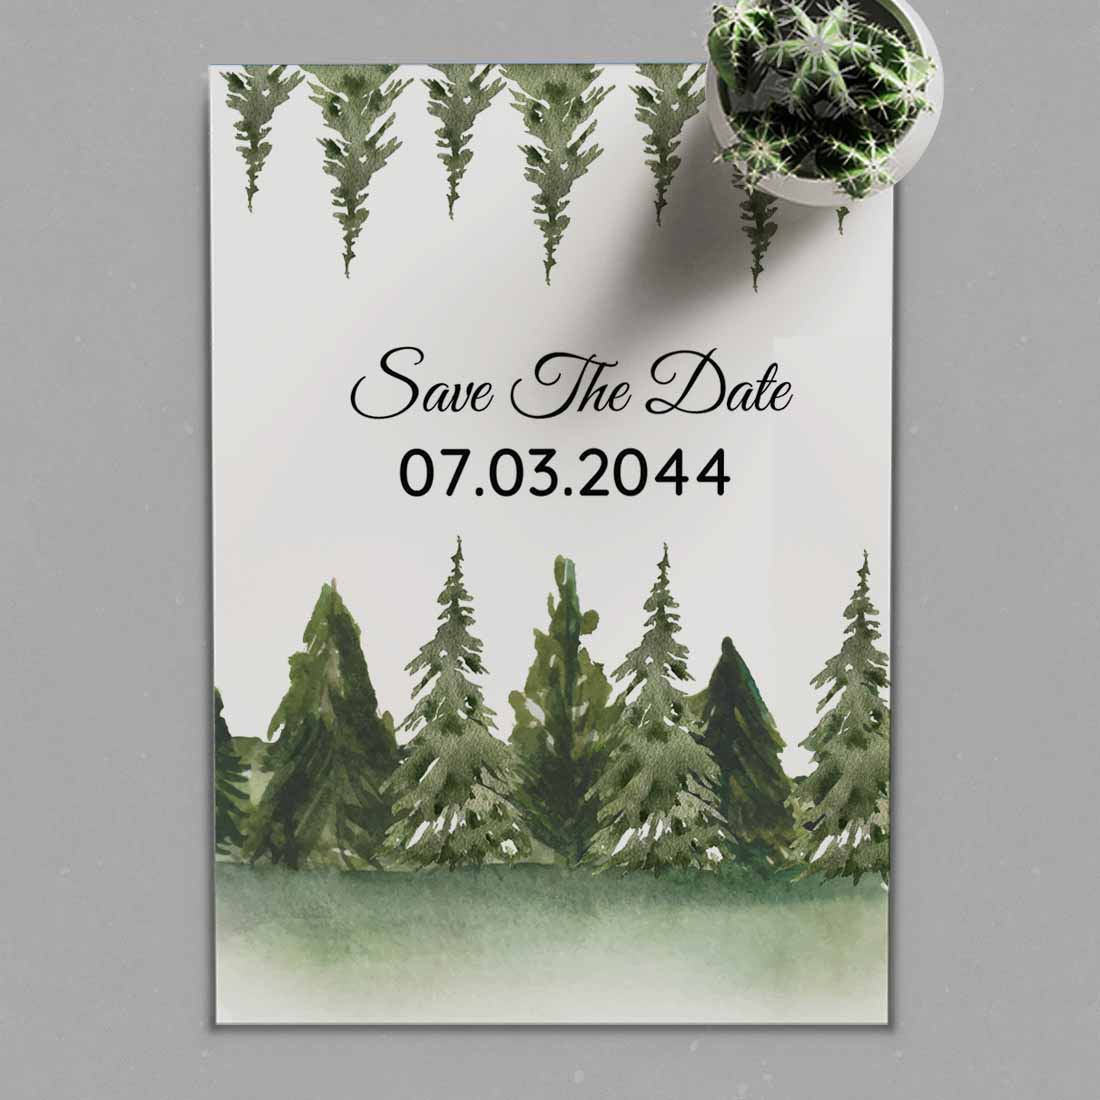 Winter Wedding Card with Mountain Forest cover image.